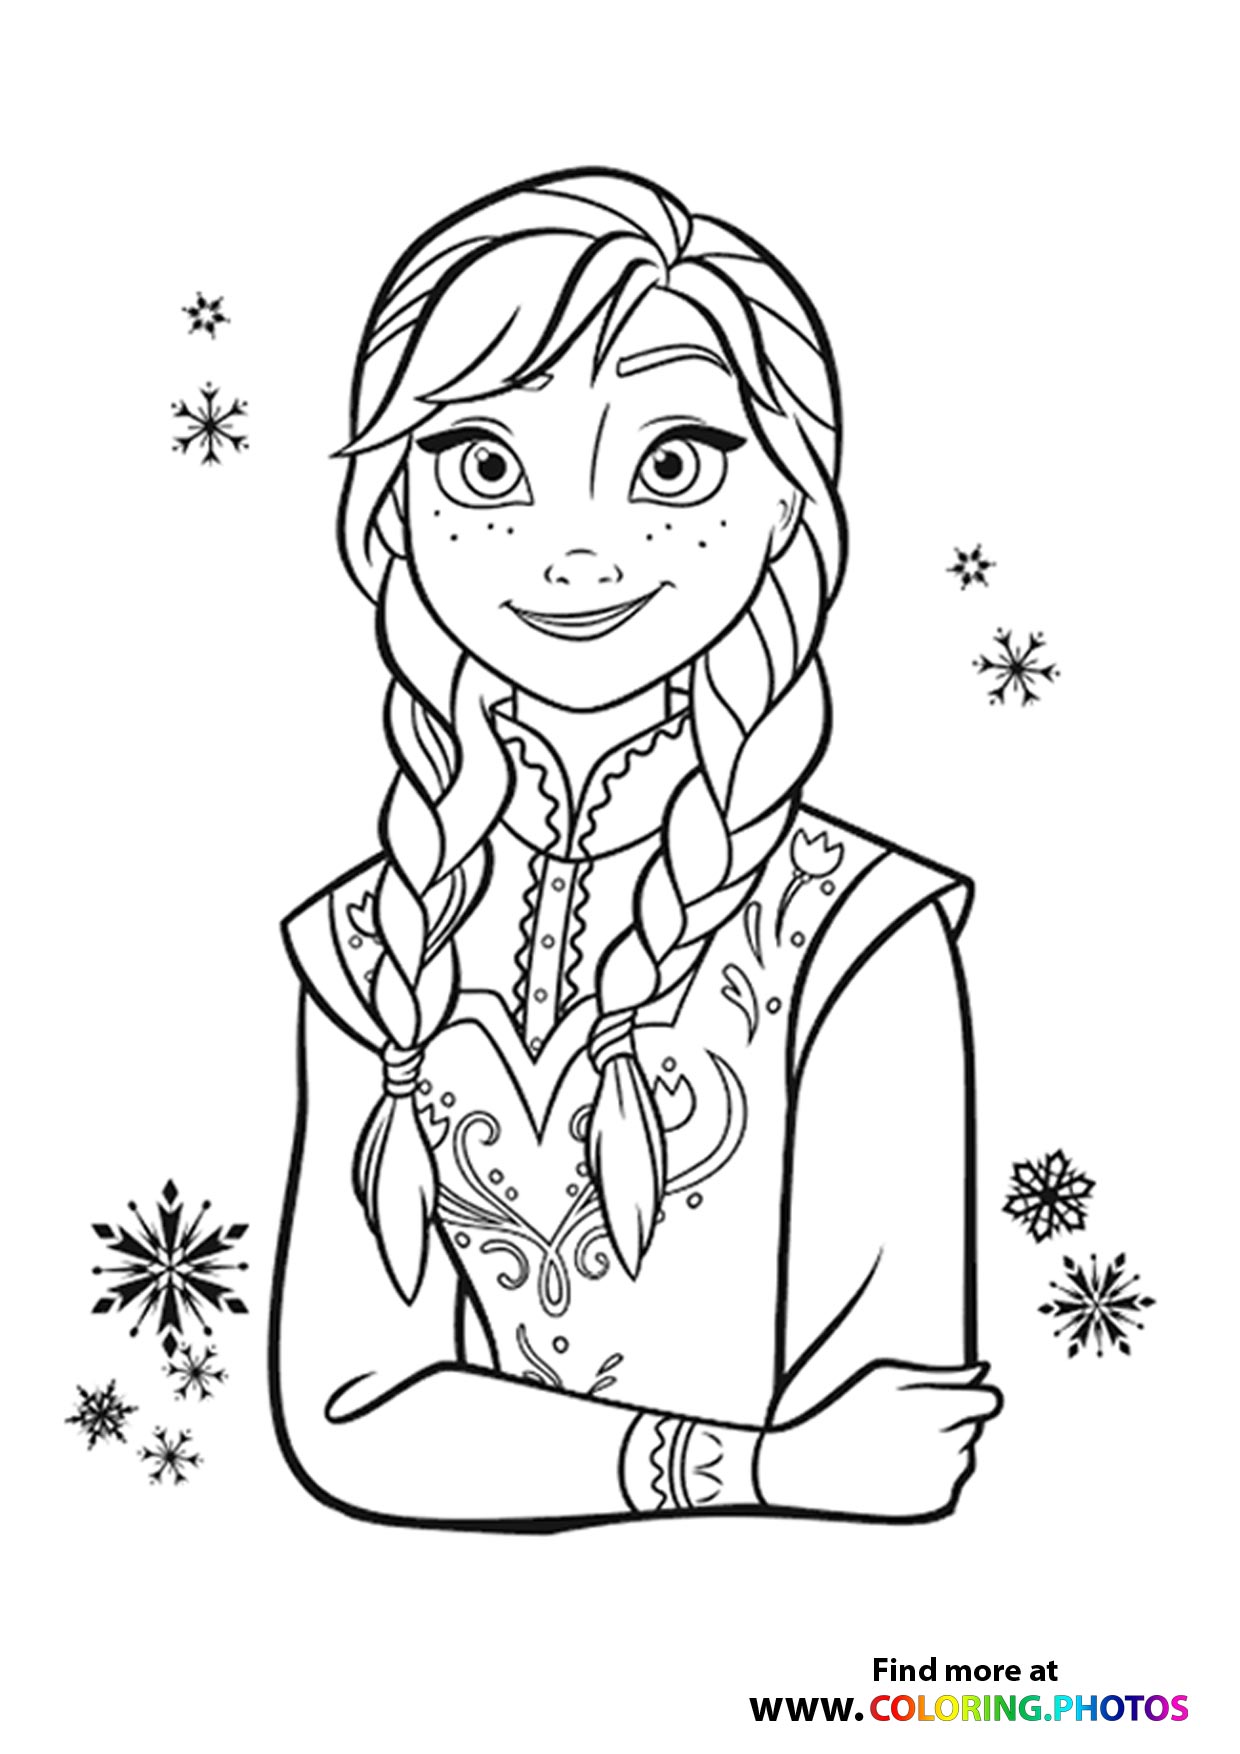 Free Encanto Coloring Pages Printable